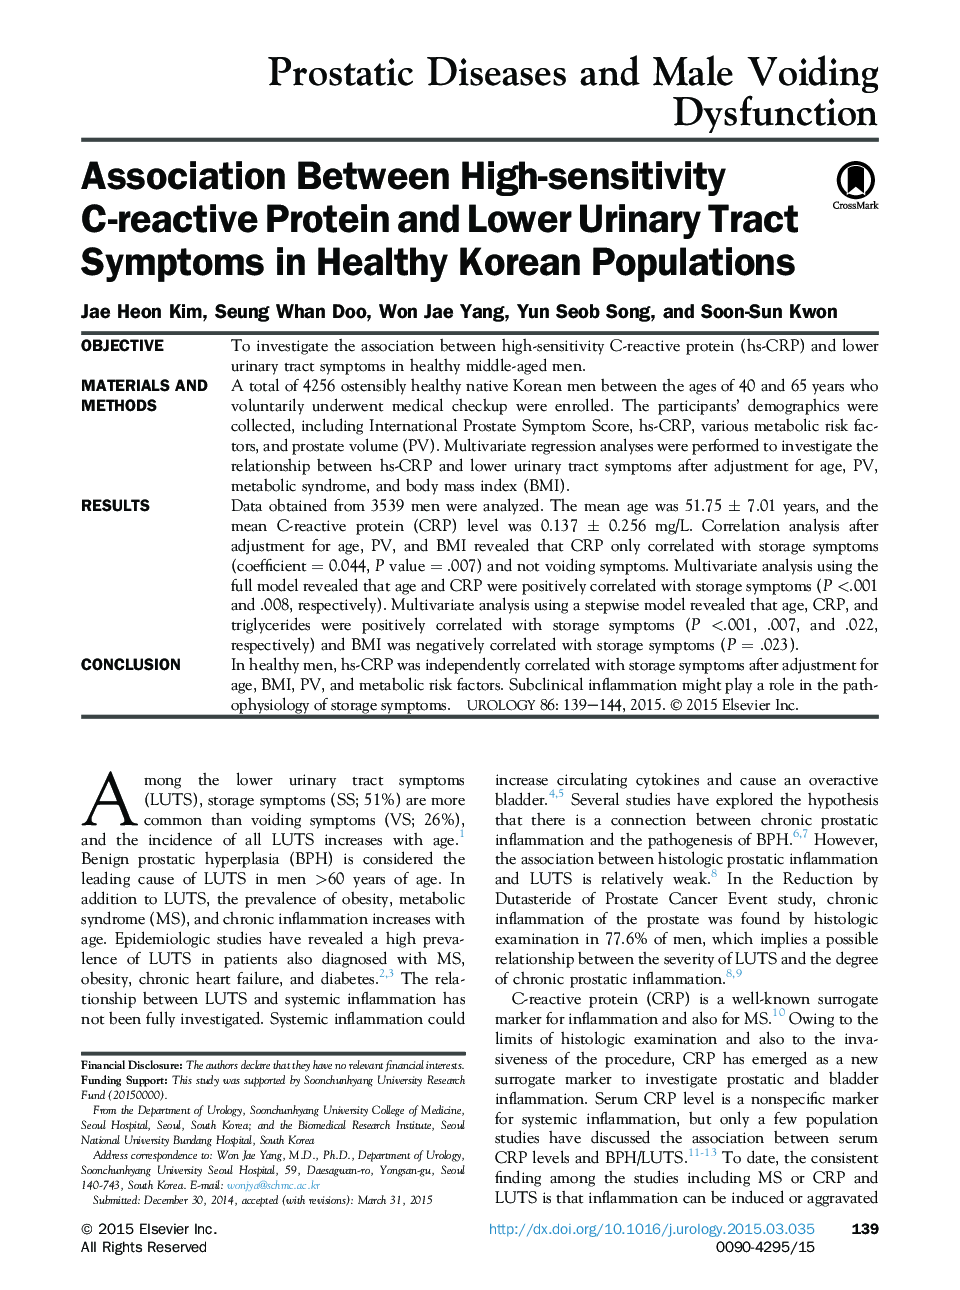 Association Between High-sensitivity C-reactive Protein and Lower Urinary Tract Symptoms in Healthy Korean Populations 